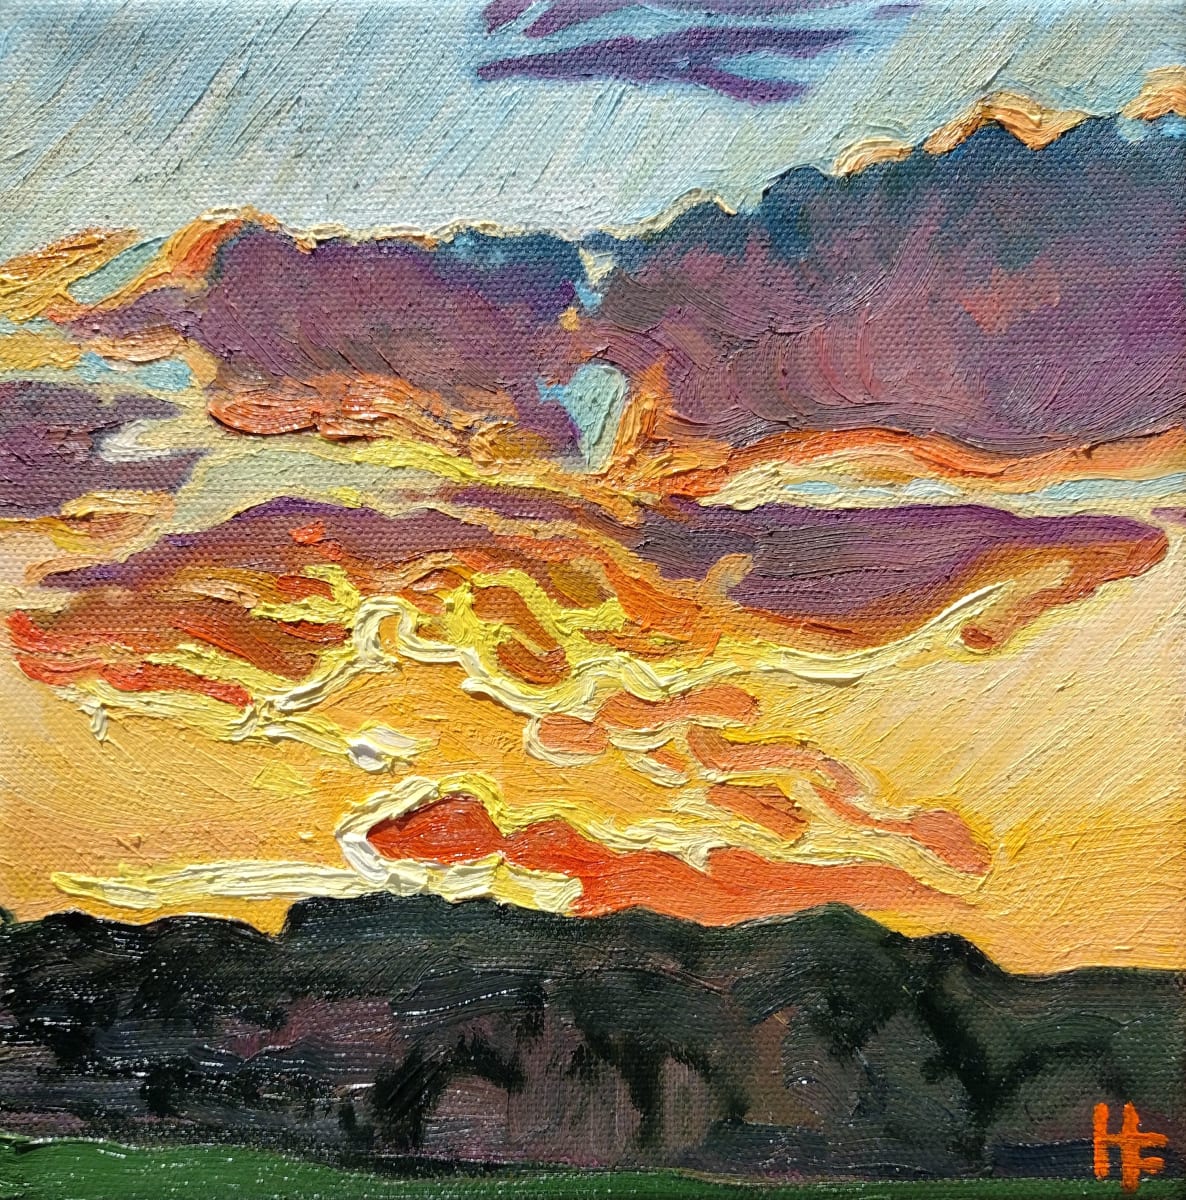 Country Sunset by Heather Friedli  Image: Golden sun drifts below the horizon, casting gentle warm light, setting clouds aglow in yellows and oranges. Shadows of the night sink into purple blue clouds and shadowed undulating landscape below.